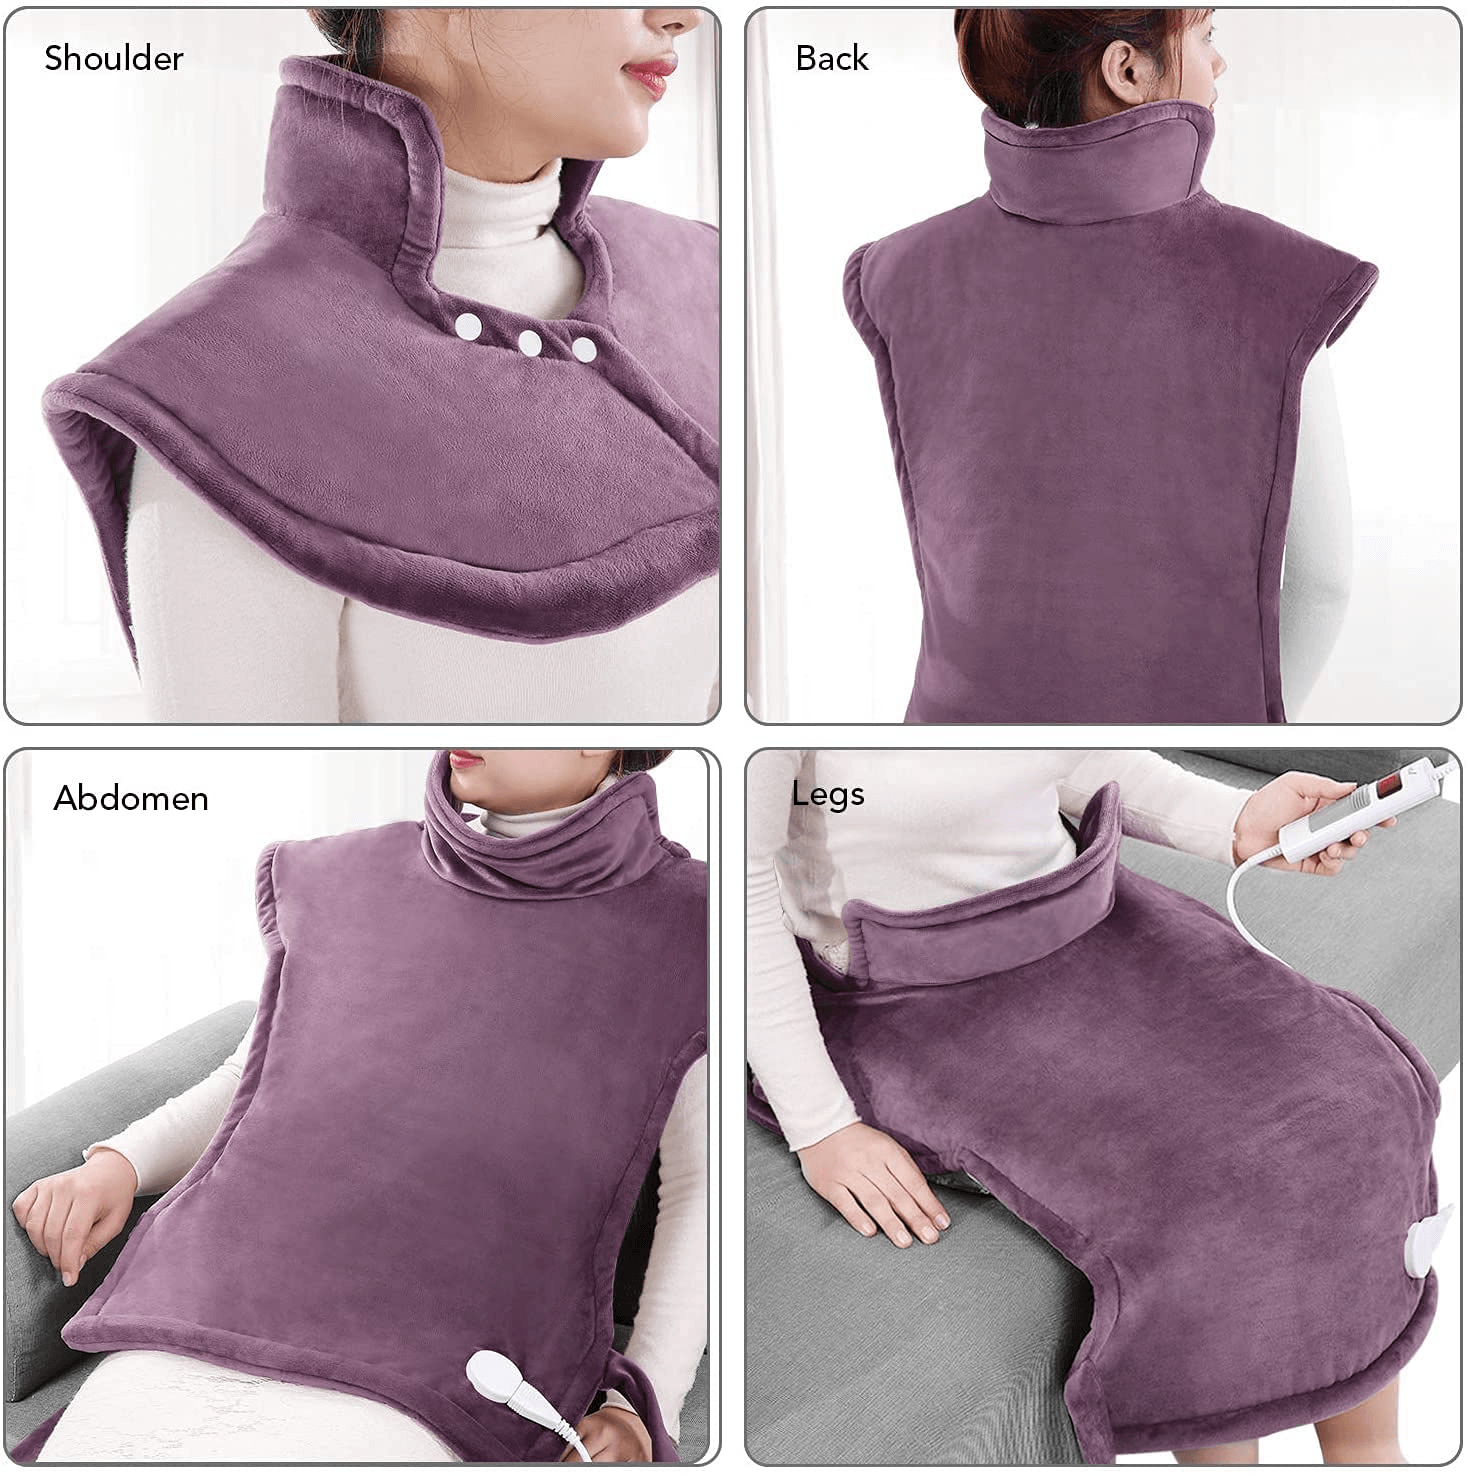 Load image into Gallery viewer, Large Electric Heating Pad for Back and Shoulders, 24”x33” Heat Wrap Vest with 6 Heating Levels, 1.5 Hours Auto Shut Off Available, Purple - NAIPO
